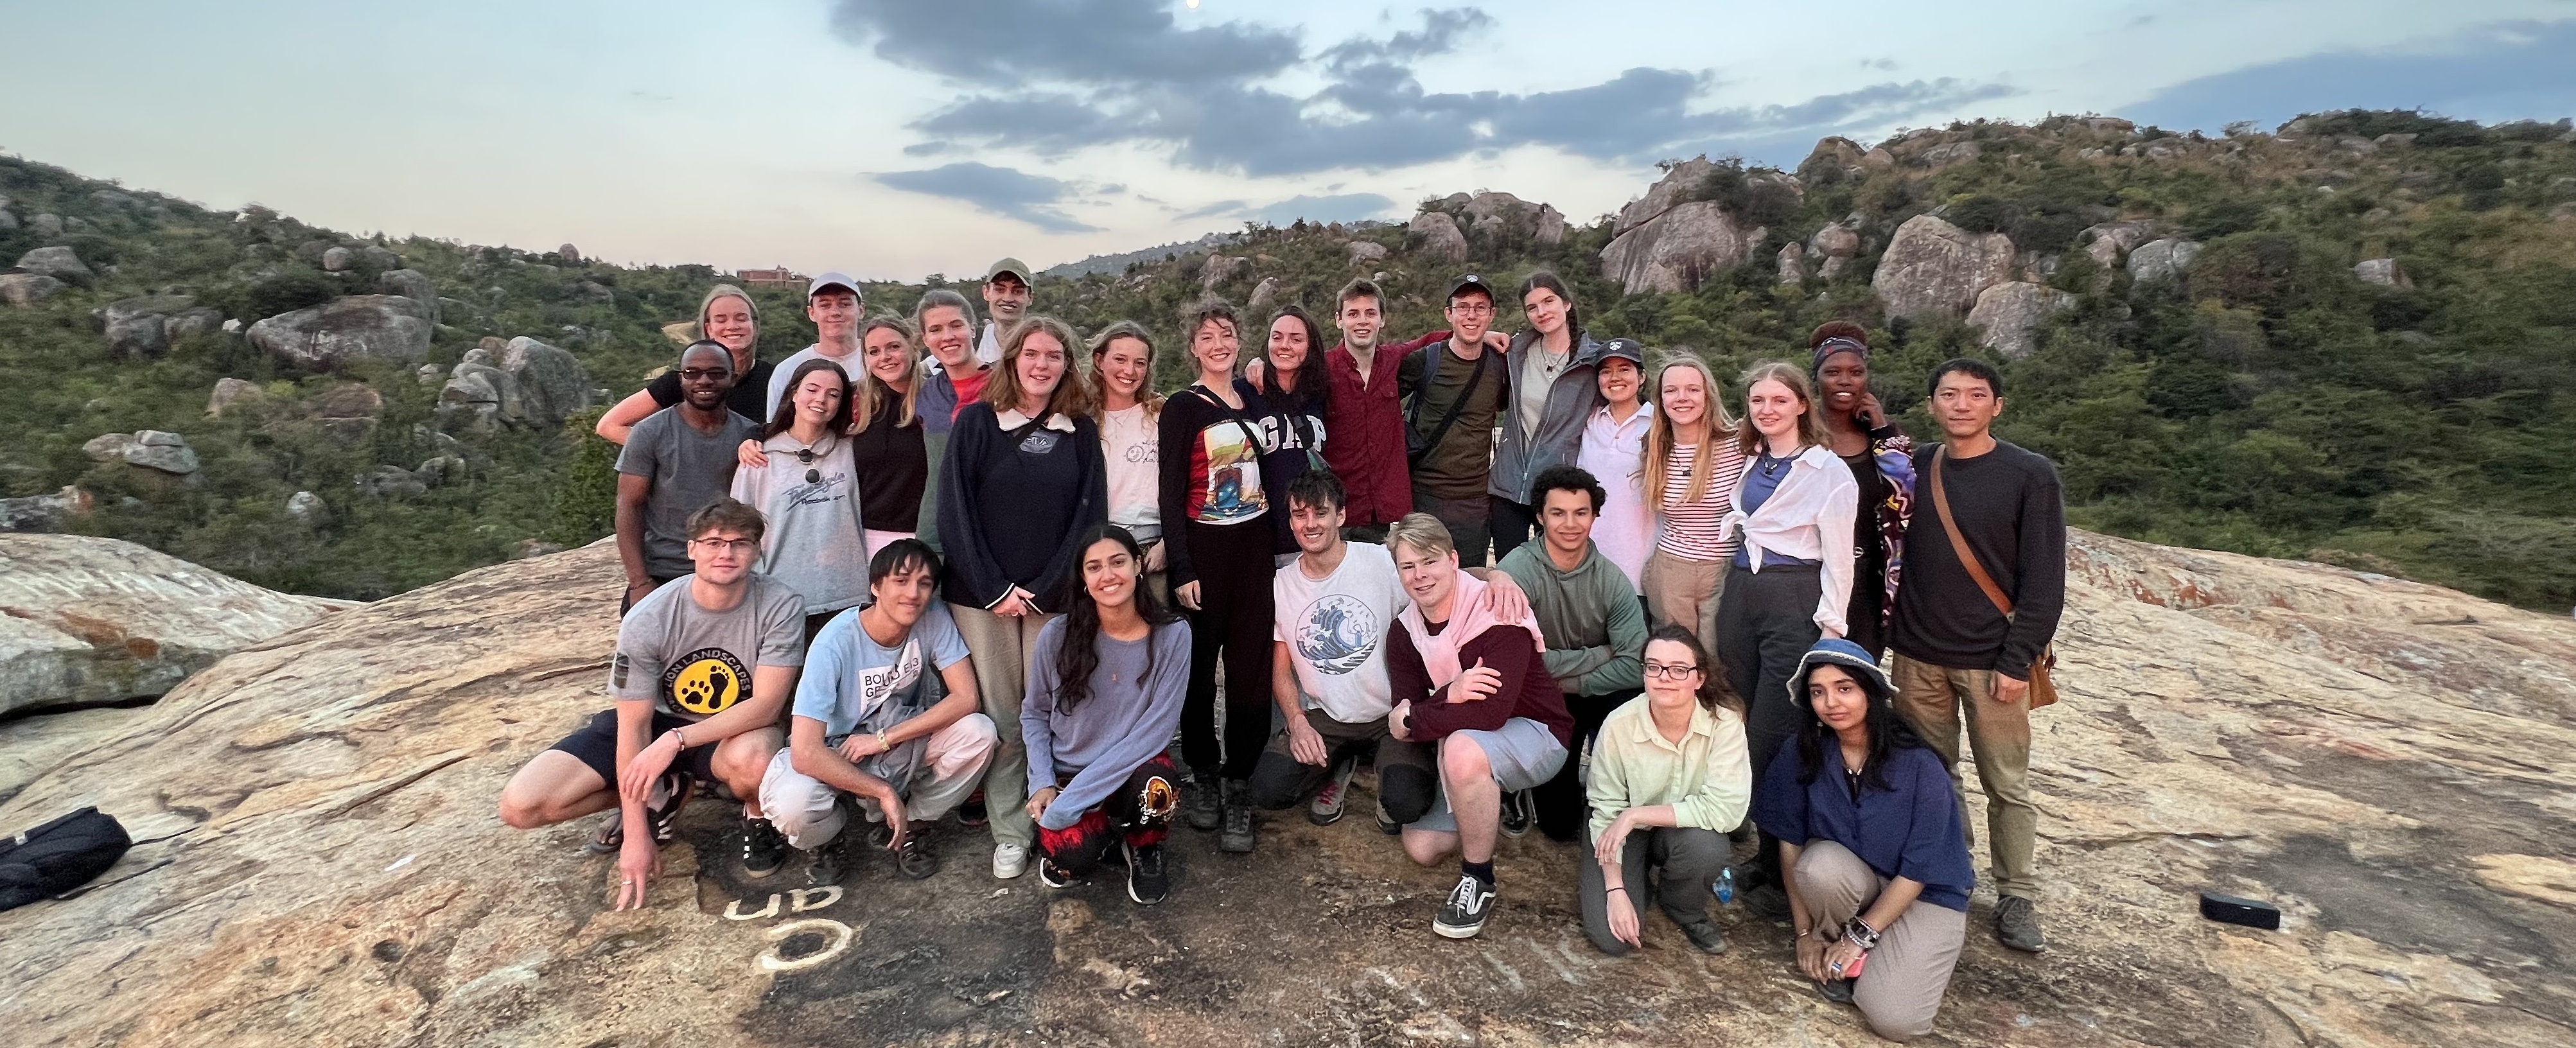 Students on the 2022 Tanzania Field Trip together